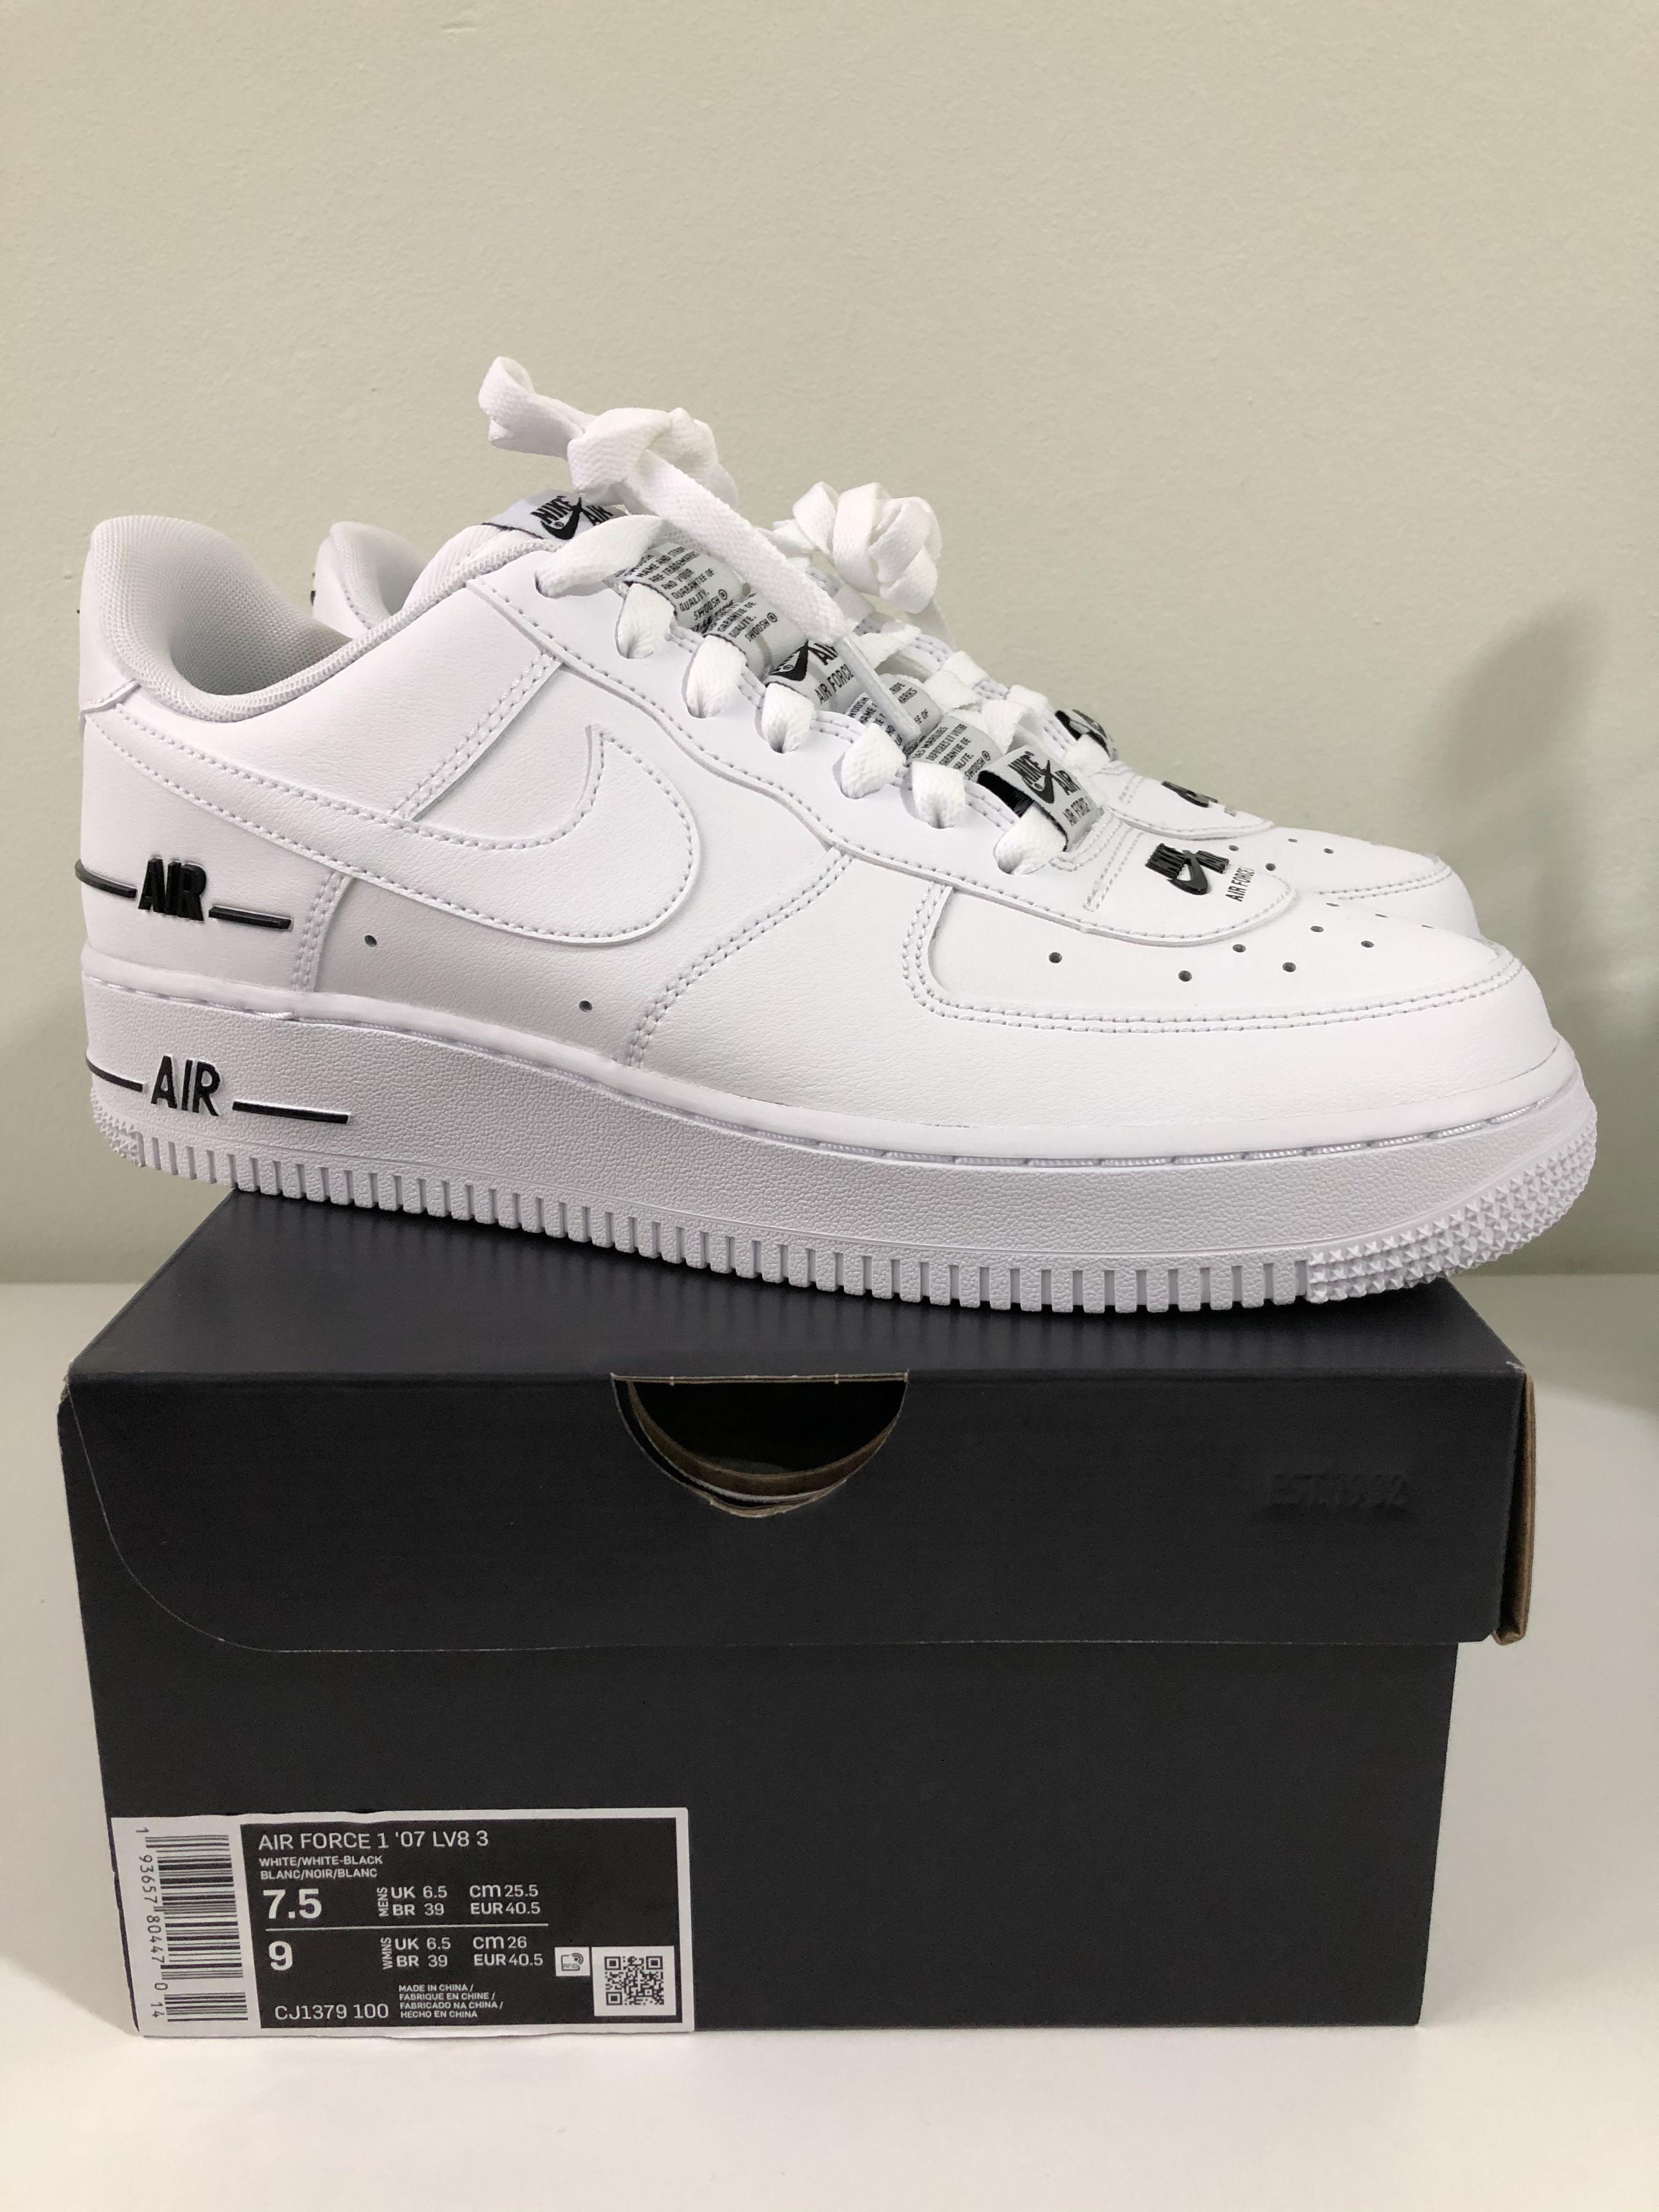 nike air force 1 low men's white and black